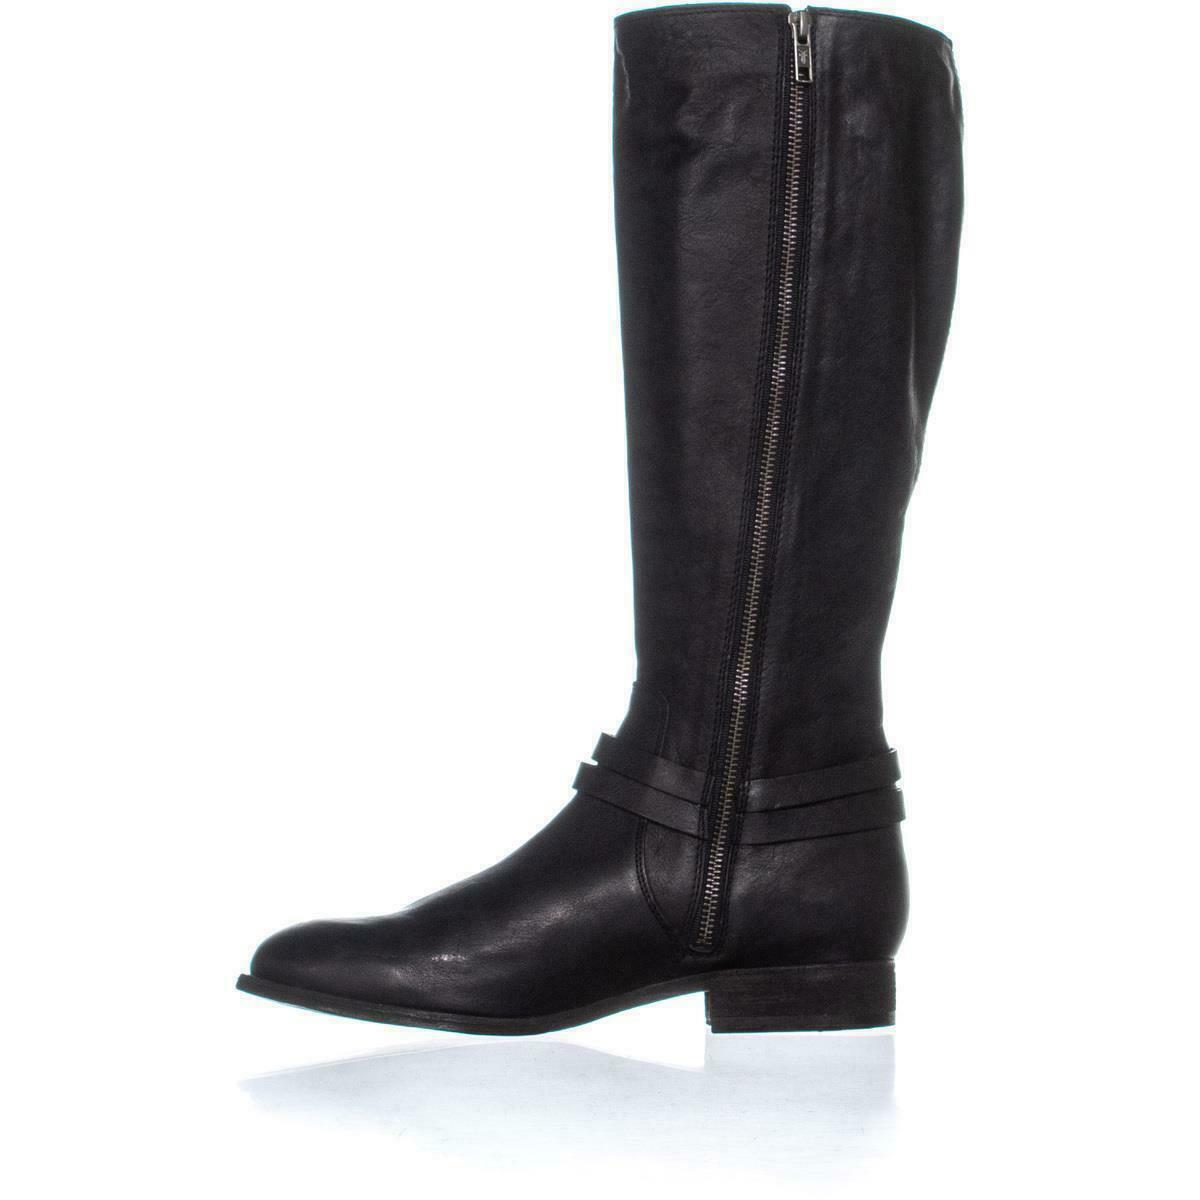 FRYE Melissa Belted Tall Knee High Riding Boots, Black Leather - Boots